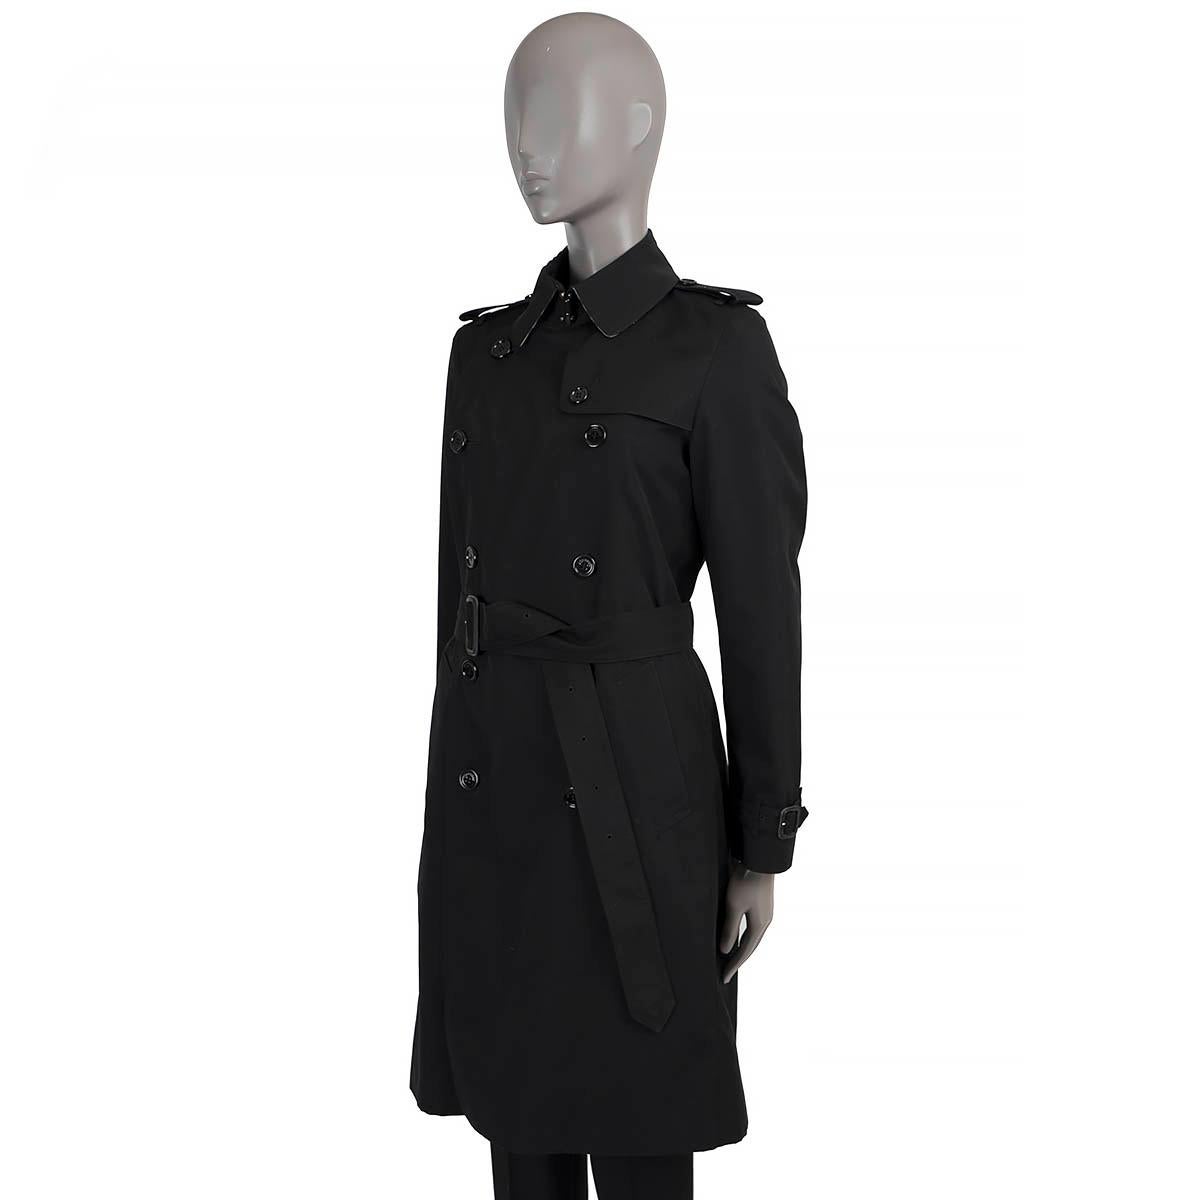 100% authentic Burberry London Waterloo trench coat in black polyerster-cotton (content tag is no longer legible). Features epaulettes, storm flap, belted cuffs and two slant pockets at the waist. Double-breasted button closure and matching fabric